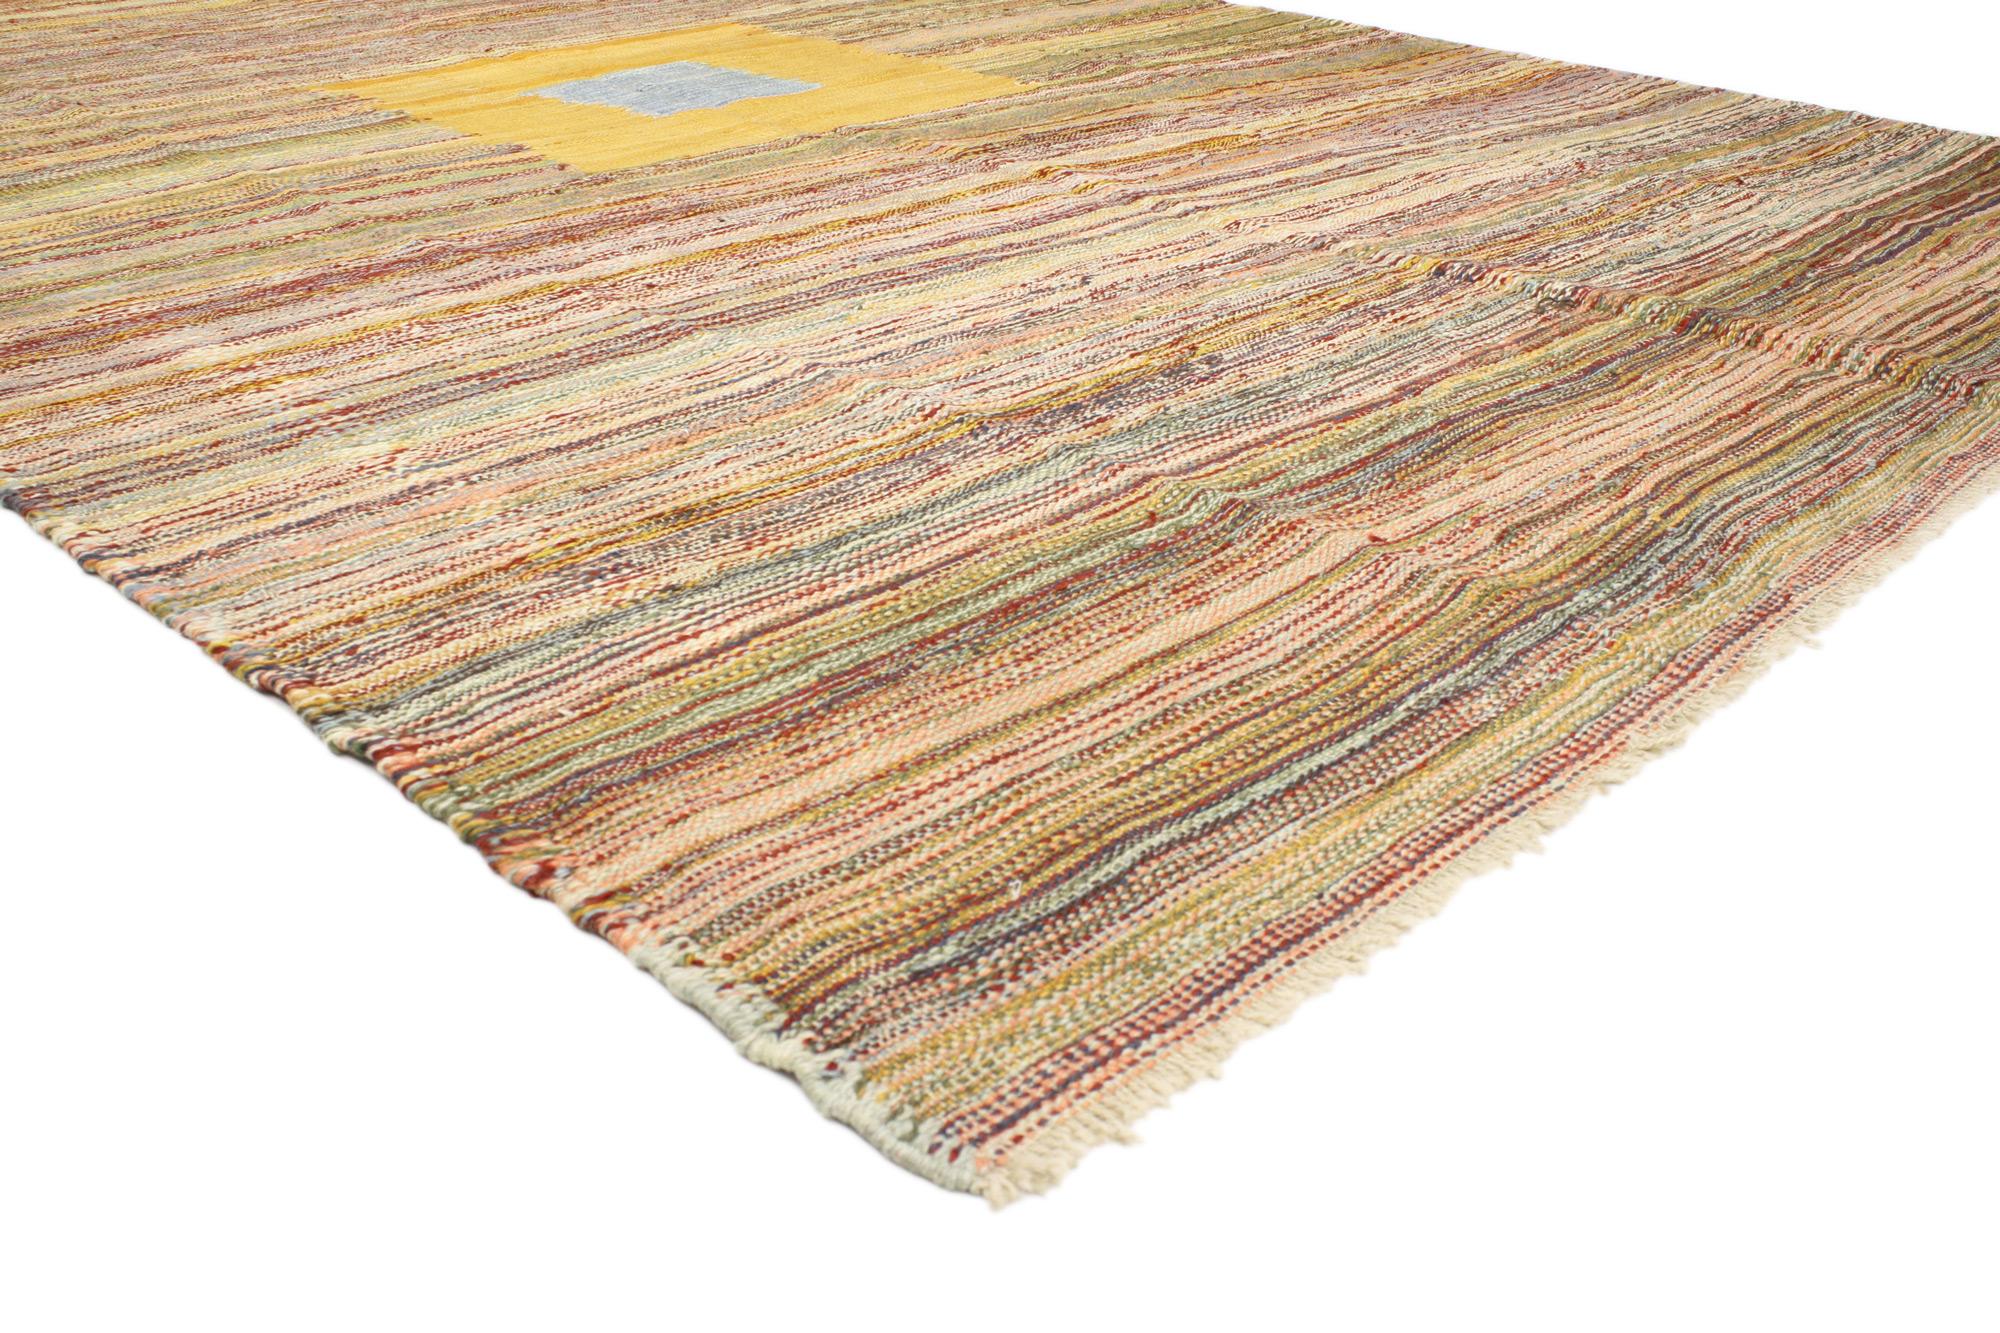 52210 New Vintage-Inspired Turkish Kilim Rug, 08'05 x 12'05.
Reflecting elements of Wabi-Sabi with incredible detail and texture, this handwoven vintage style Turkish kilim rug will take on a curated lived-in look that feels timeless while imparting